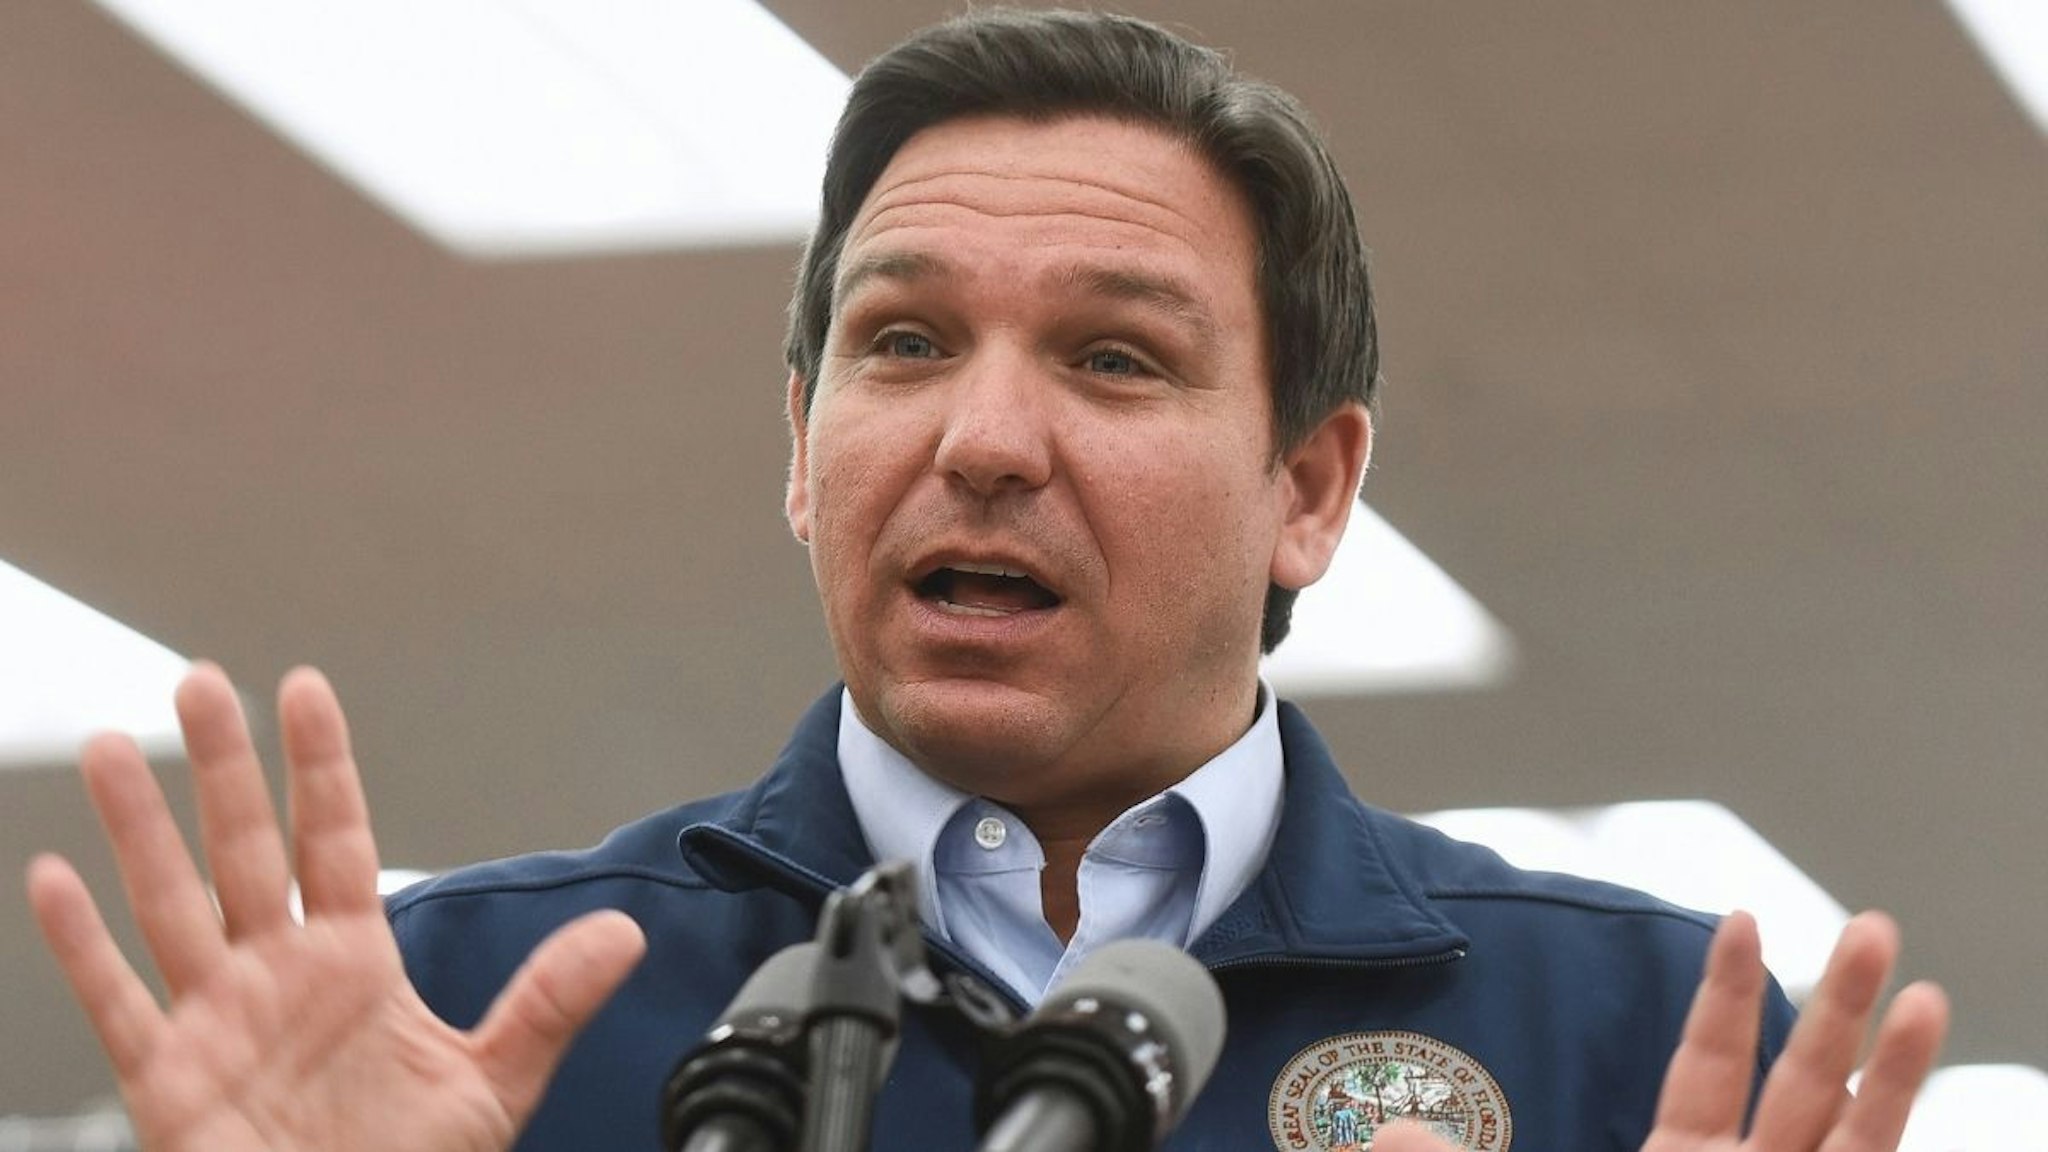 Florida Gov. Ron DeSantis speaks at a press conference at Buc-ee's travel center, where he announced his proposal of more than $1 billion in gas tax relief for Floridians in response to rising gas prices caused by inflation. DeSantis is proposing to the Florida legislature a five-month gas tax holiday.